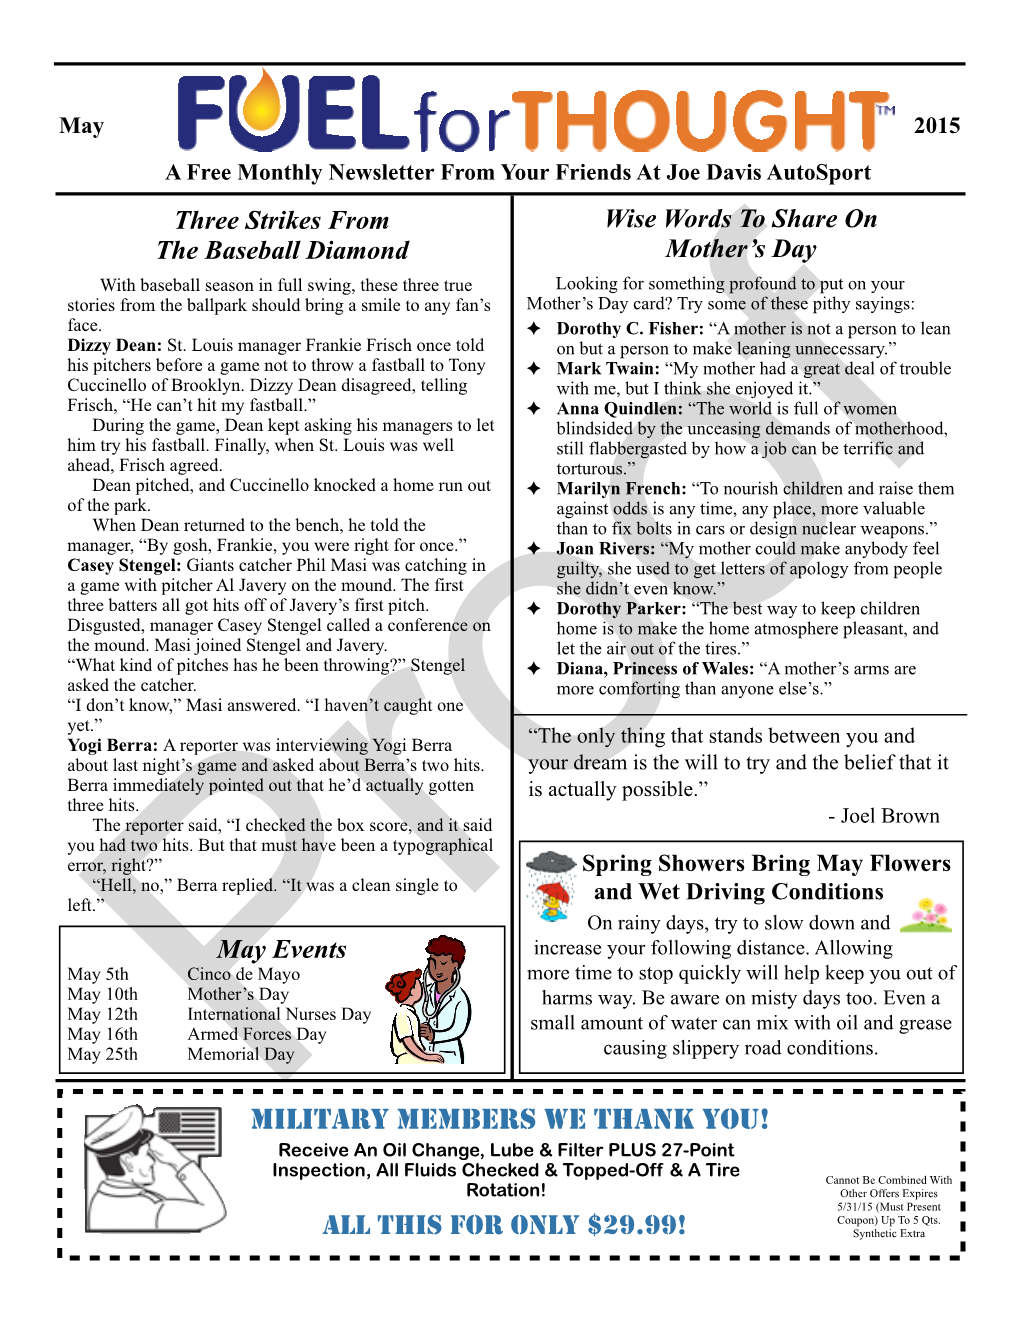 May, 2015 Newsletter